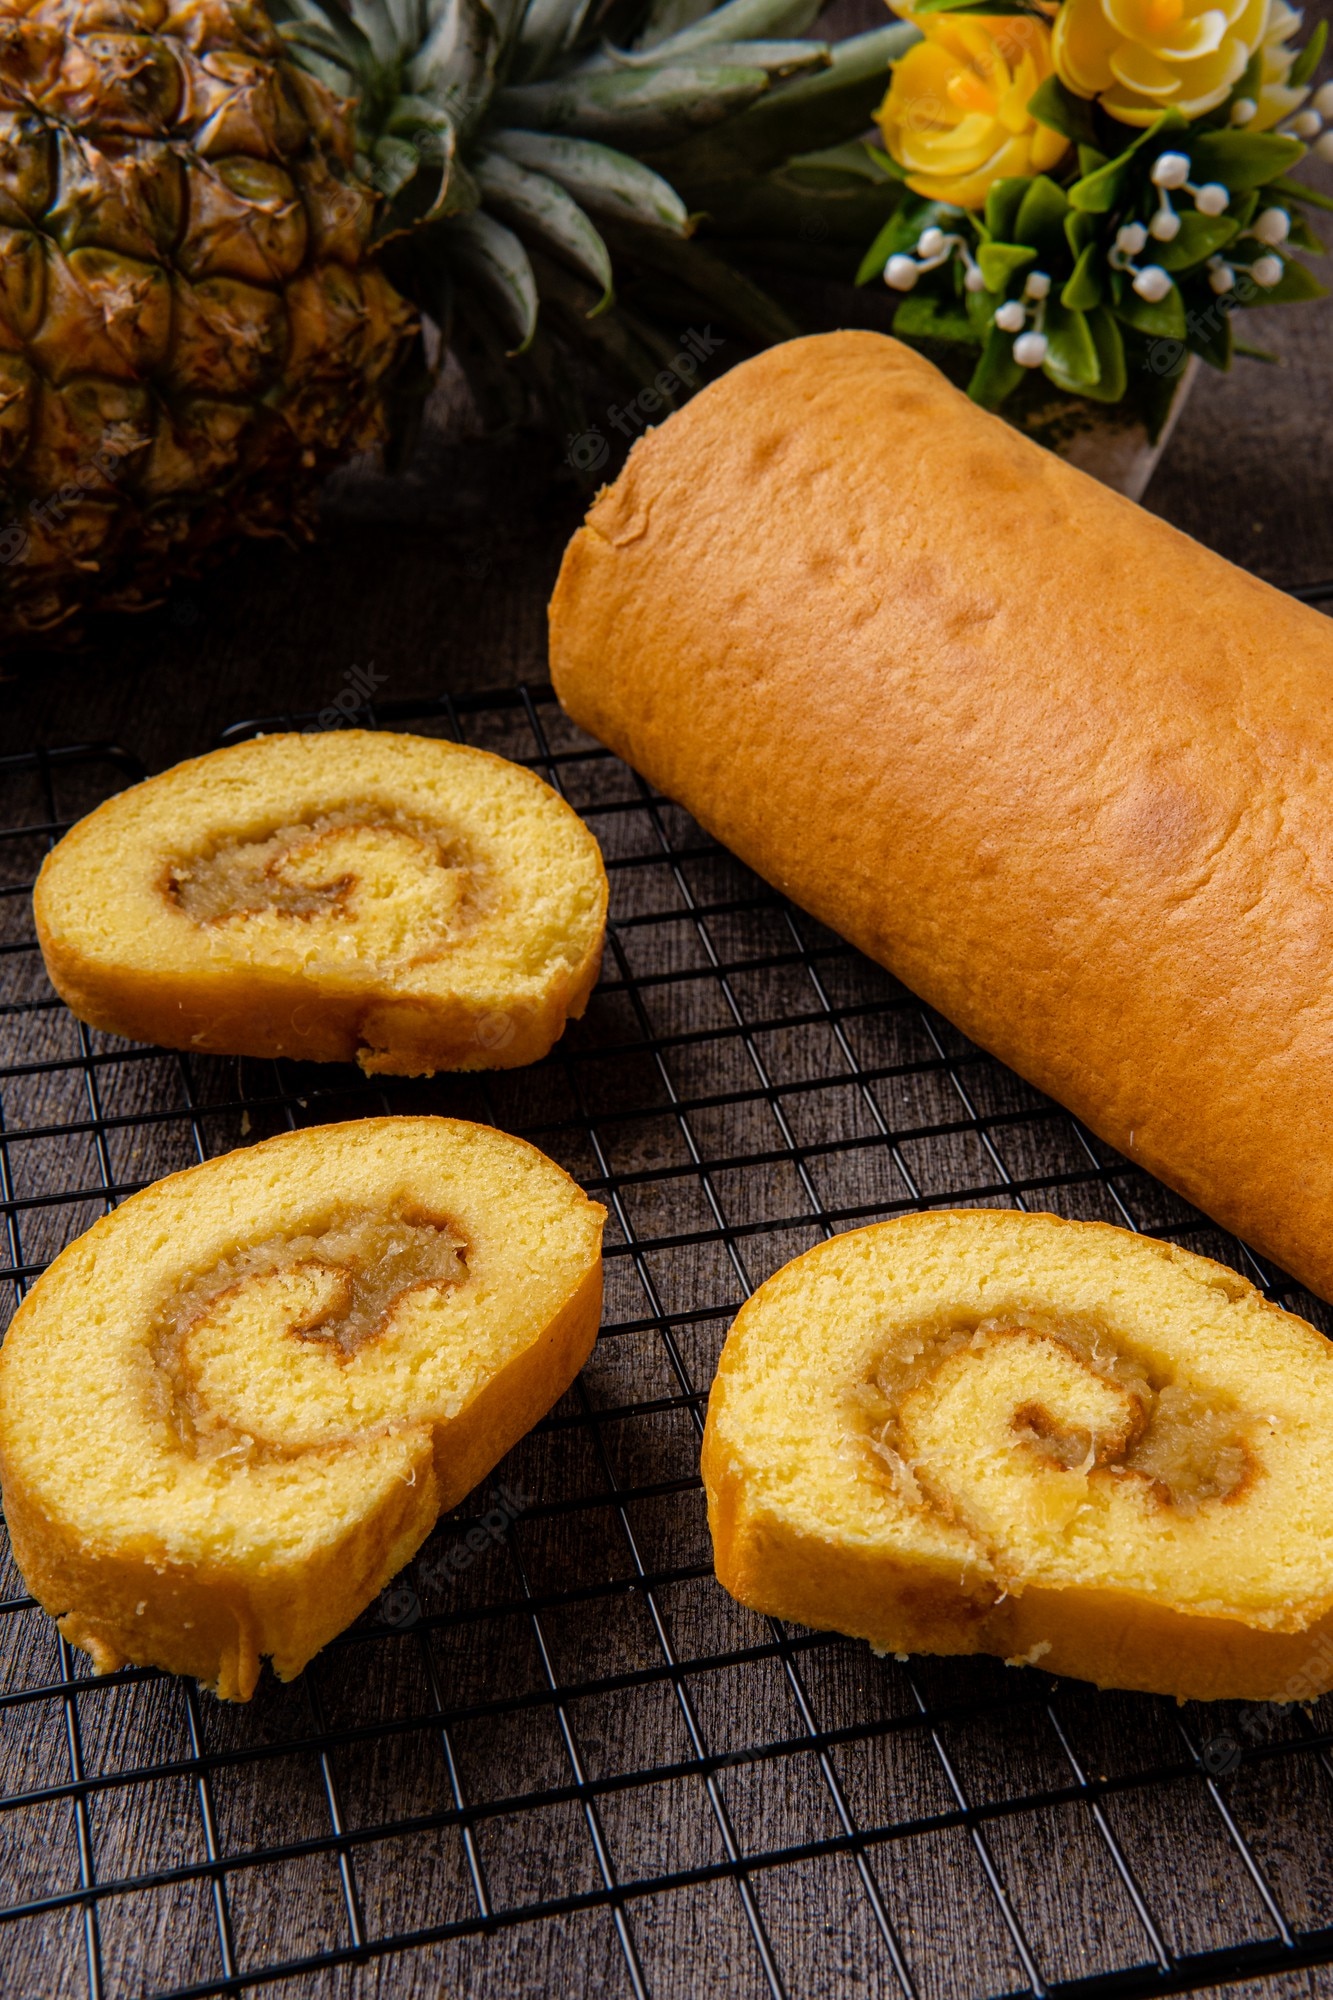 Premium Photo | Delicious swiss roll roll cake or bolu gulung with  pineapple jam bolu gulung is a sponge cake that is baked using a shallow  pan filled with jam or butter